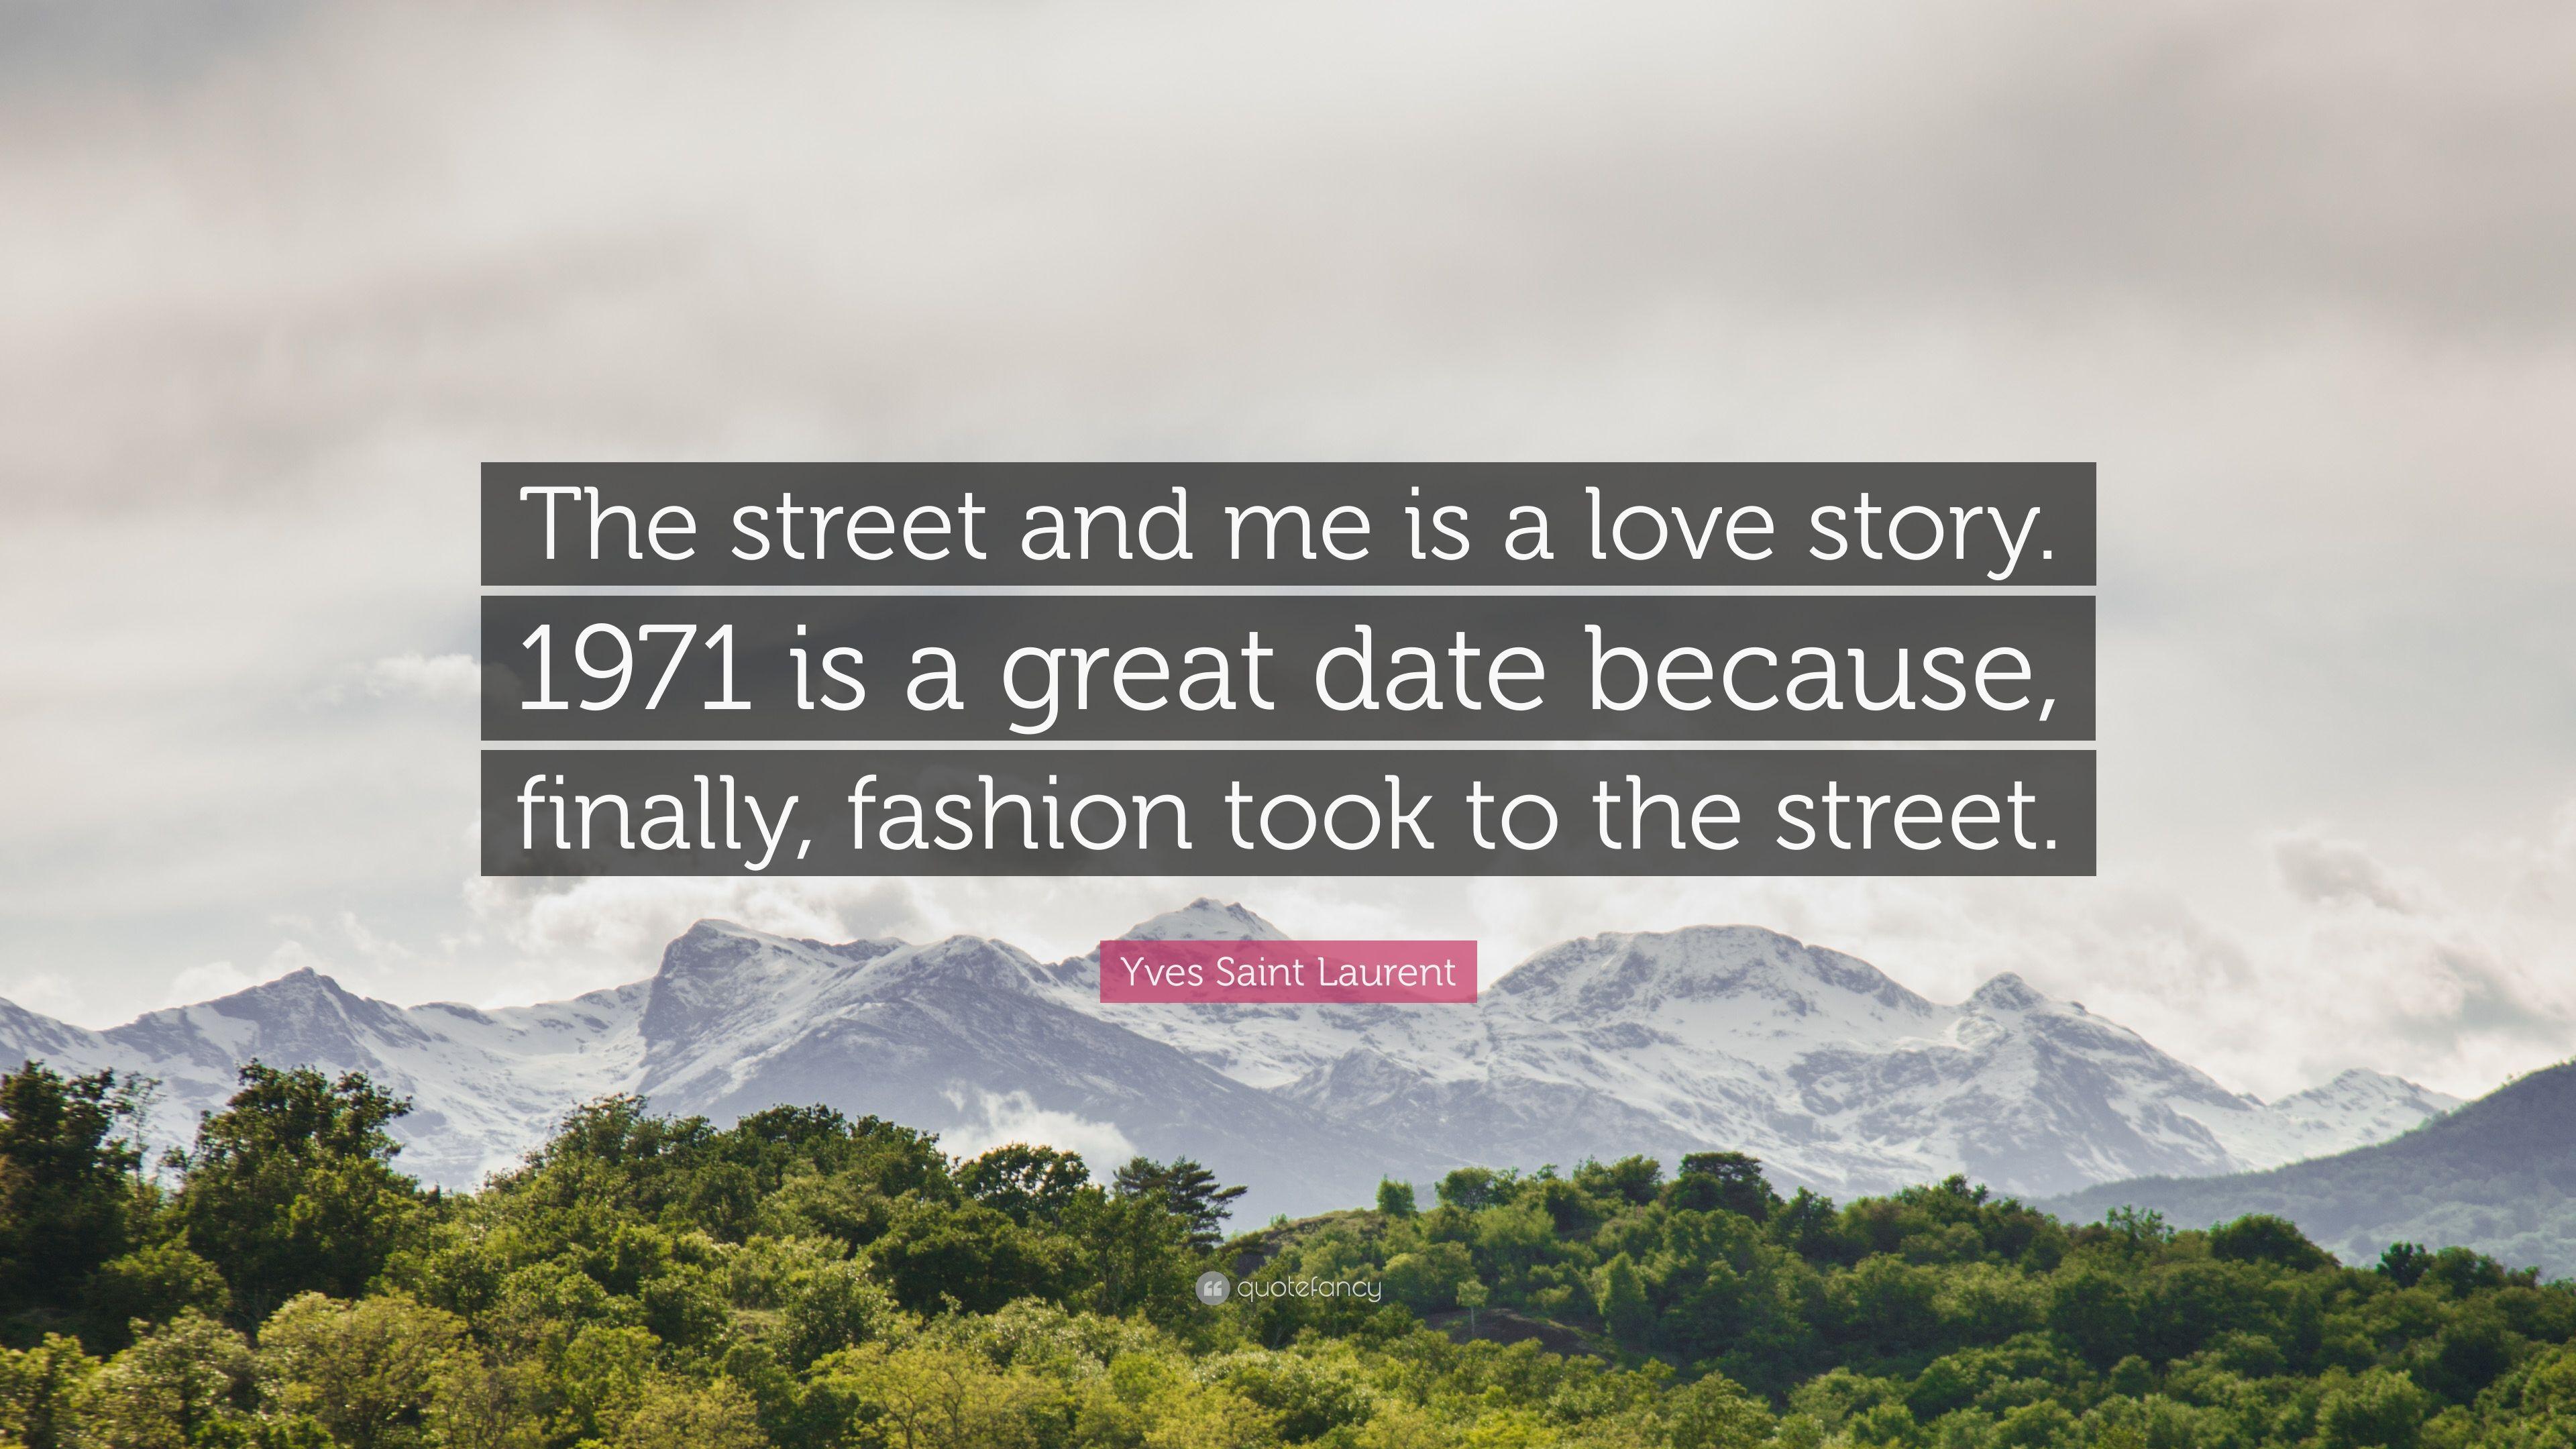 Yves Saint Laurent Quote: “The street and me is a love story. 1971